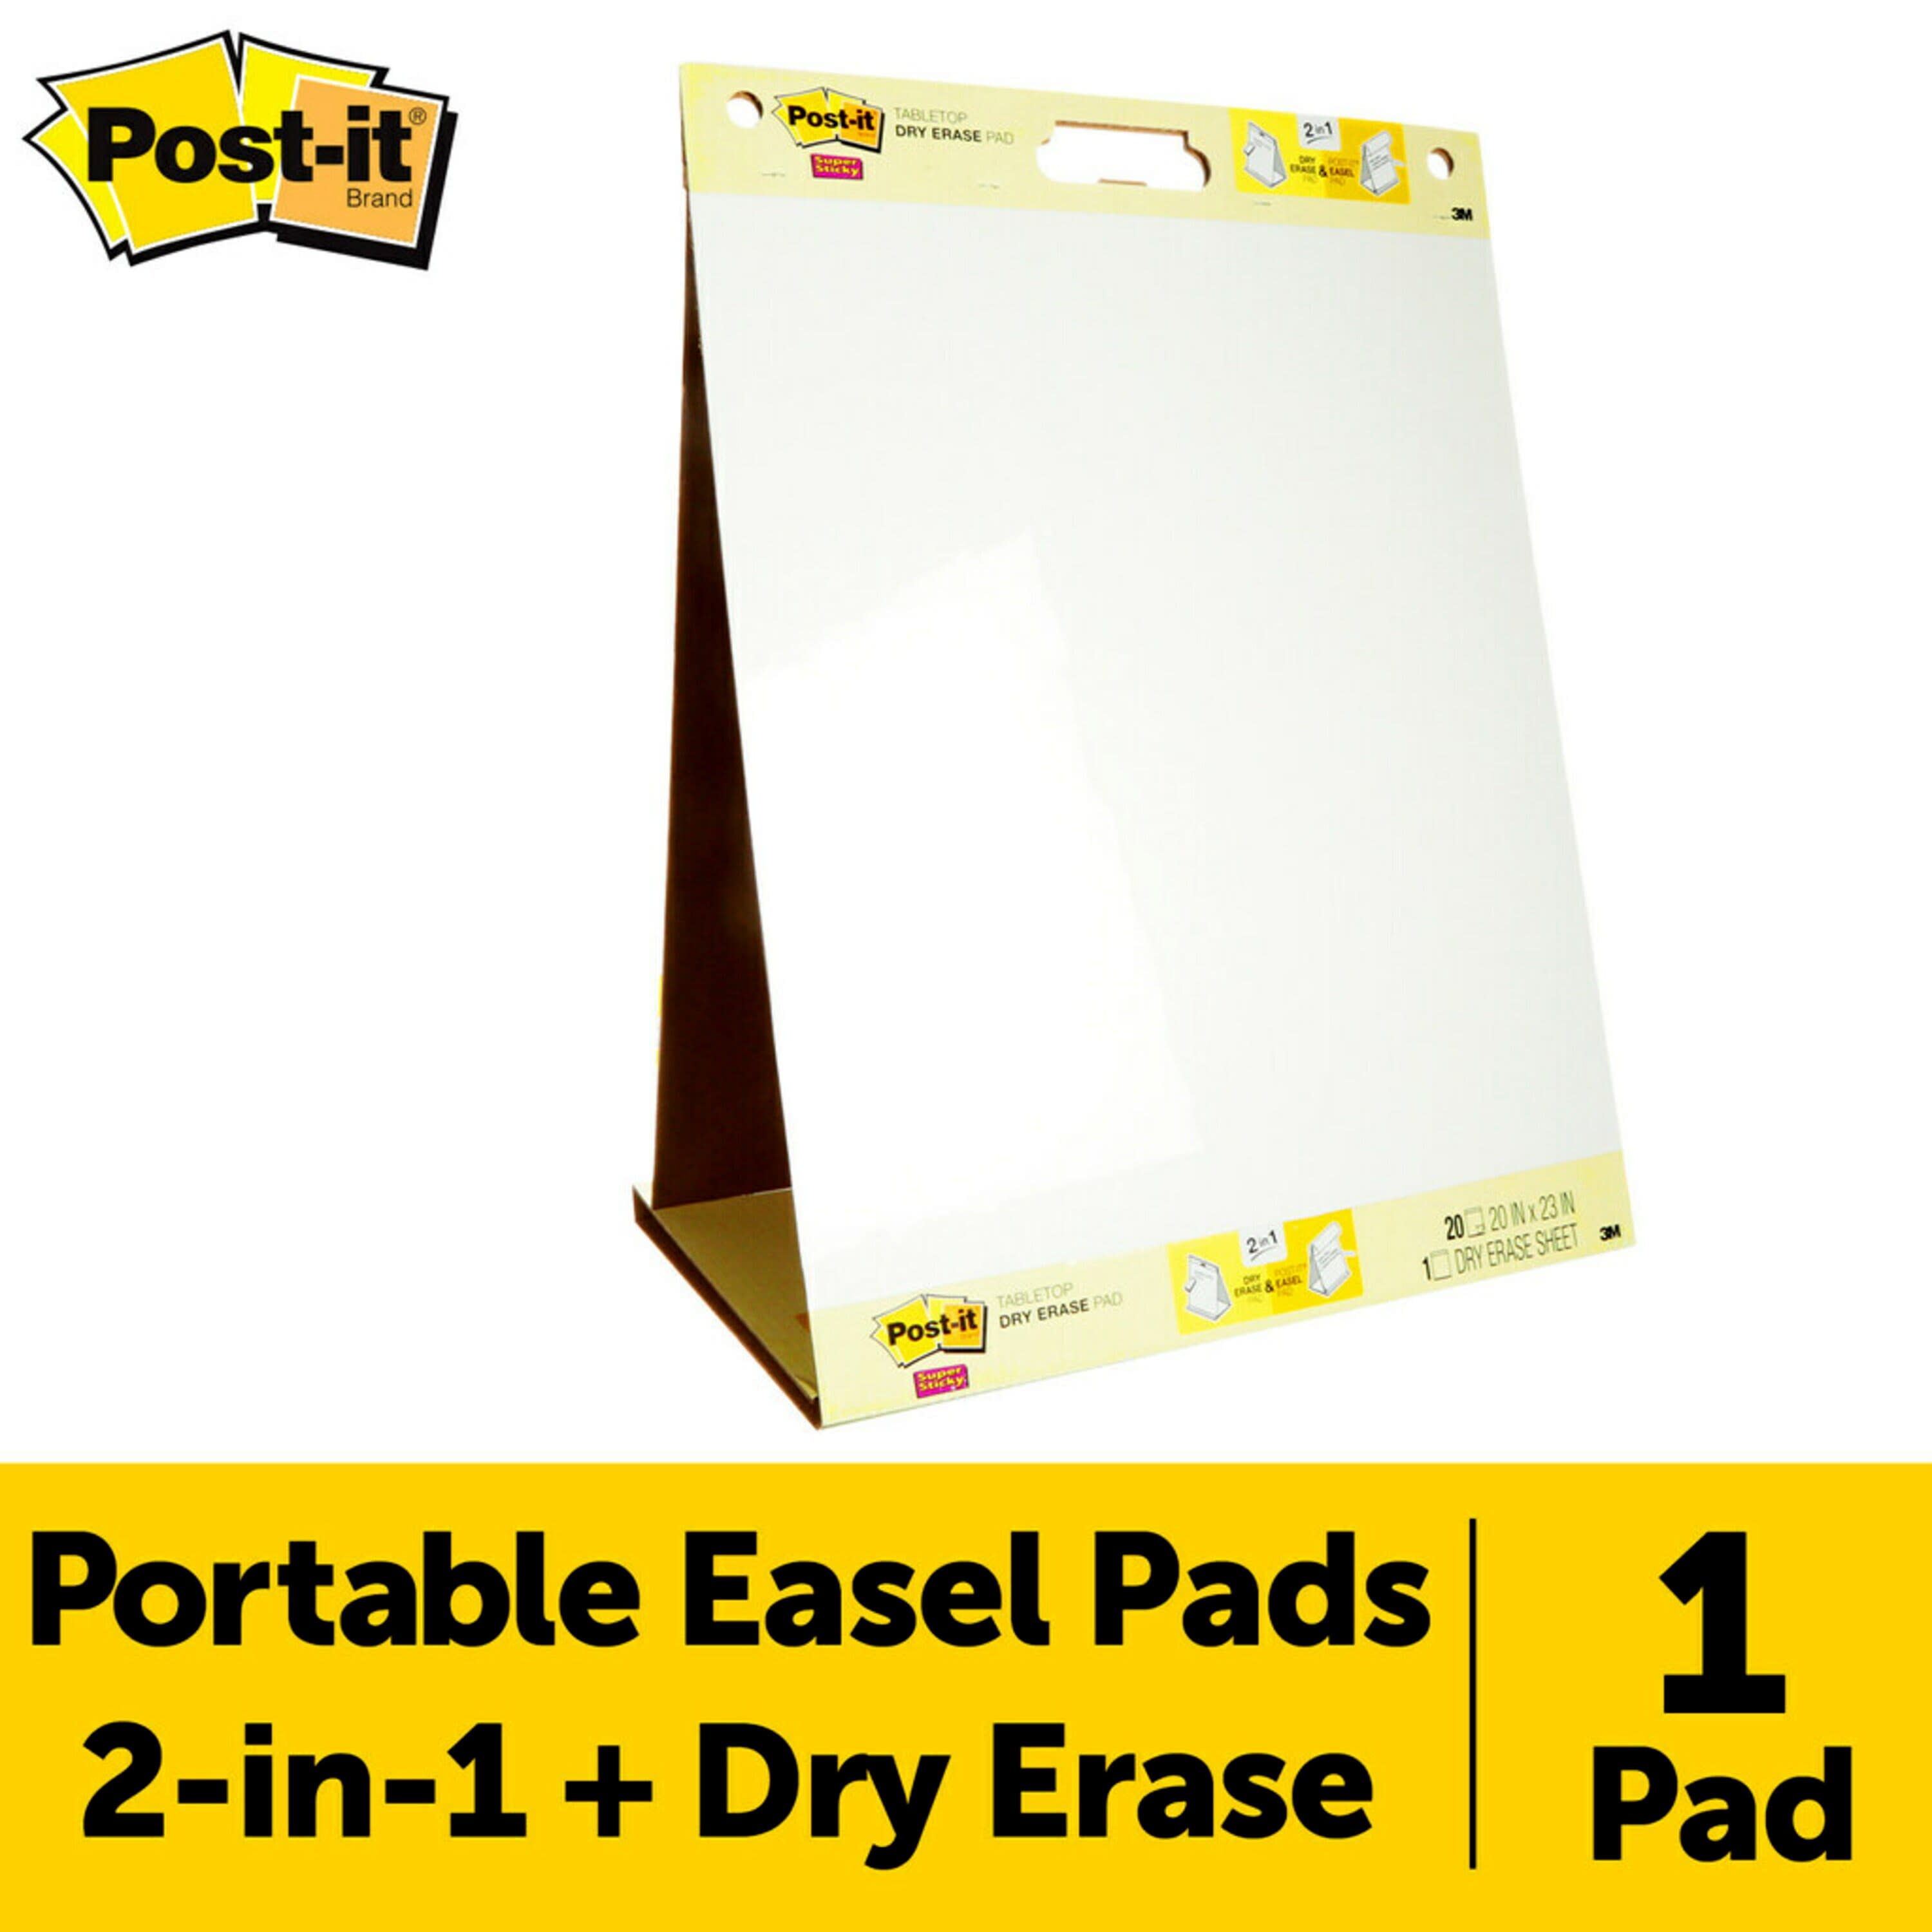 Post-it Self Stick Tabletop Easel Unruled Pad 20 x 23 White 20 Sheets 563R,  1 - Ralphs